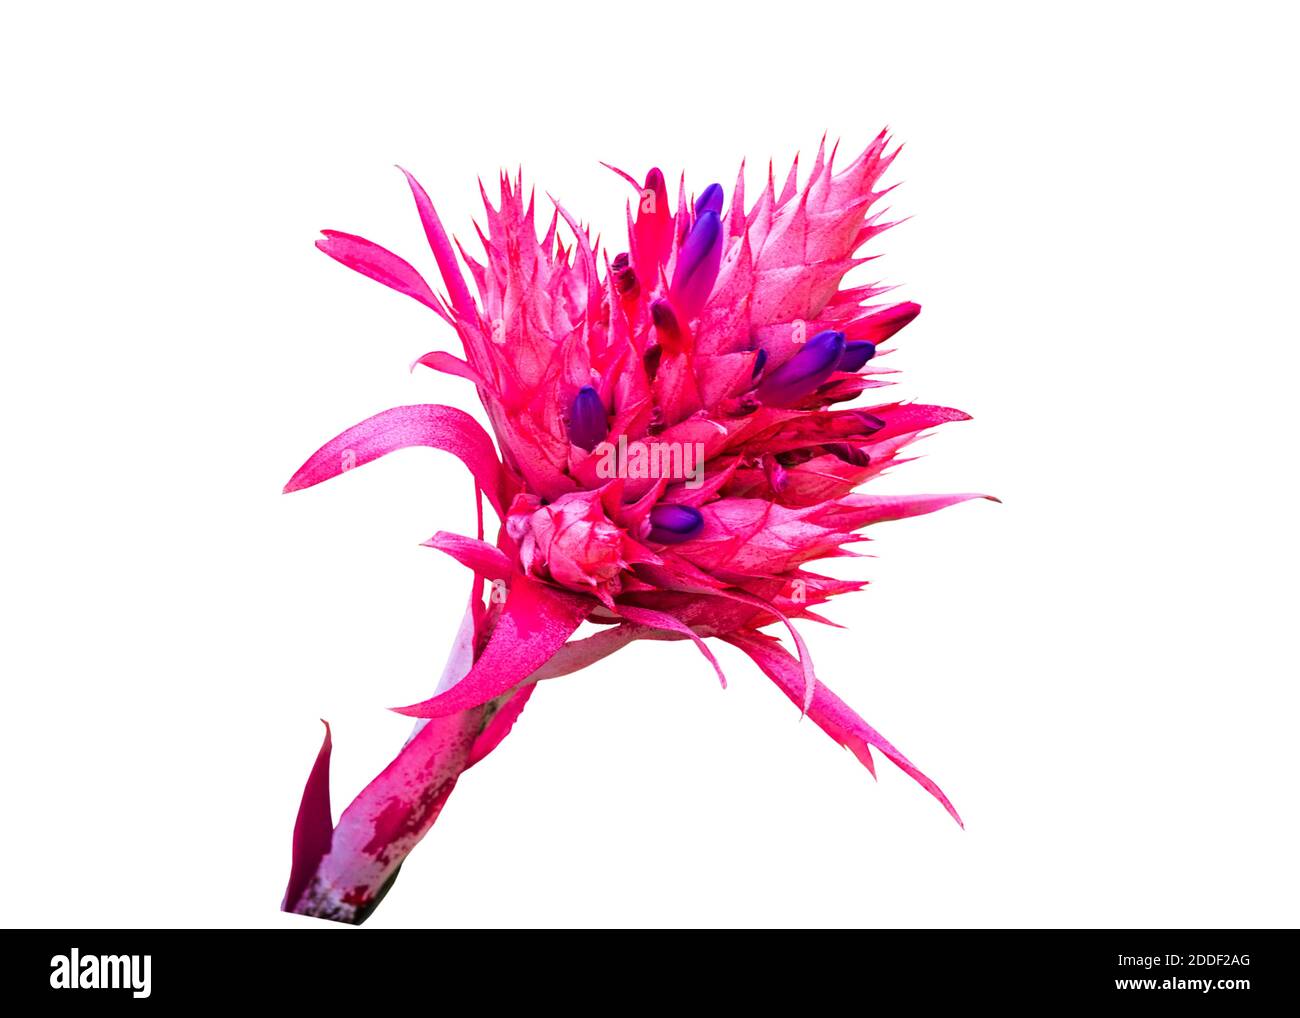 Colorful of pink  Bromeliad flower isolated on white background.Saved with clipping path. Stock Photo